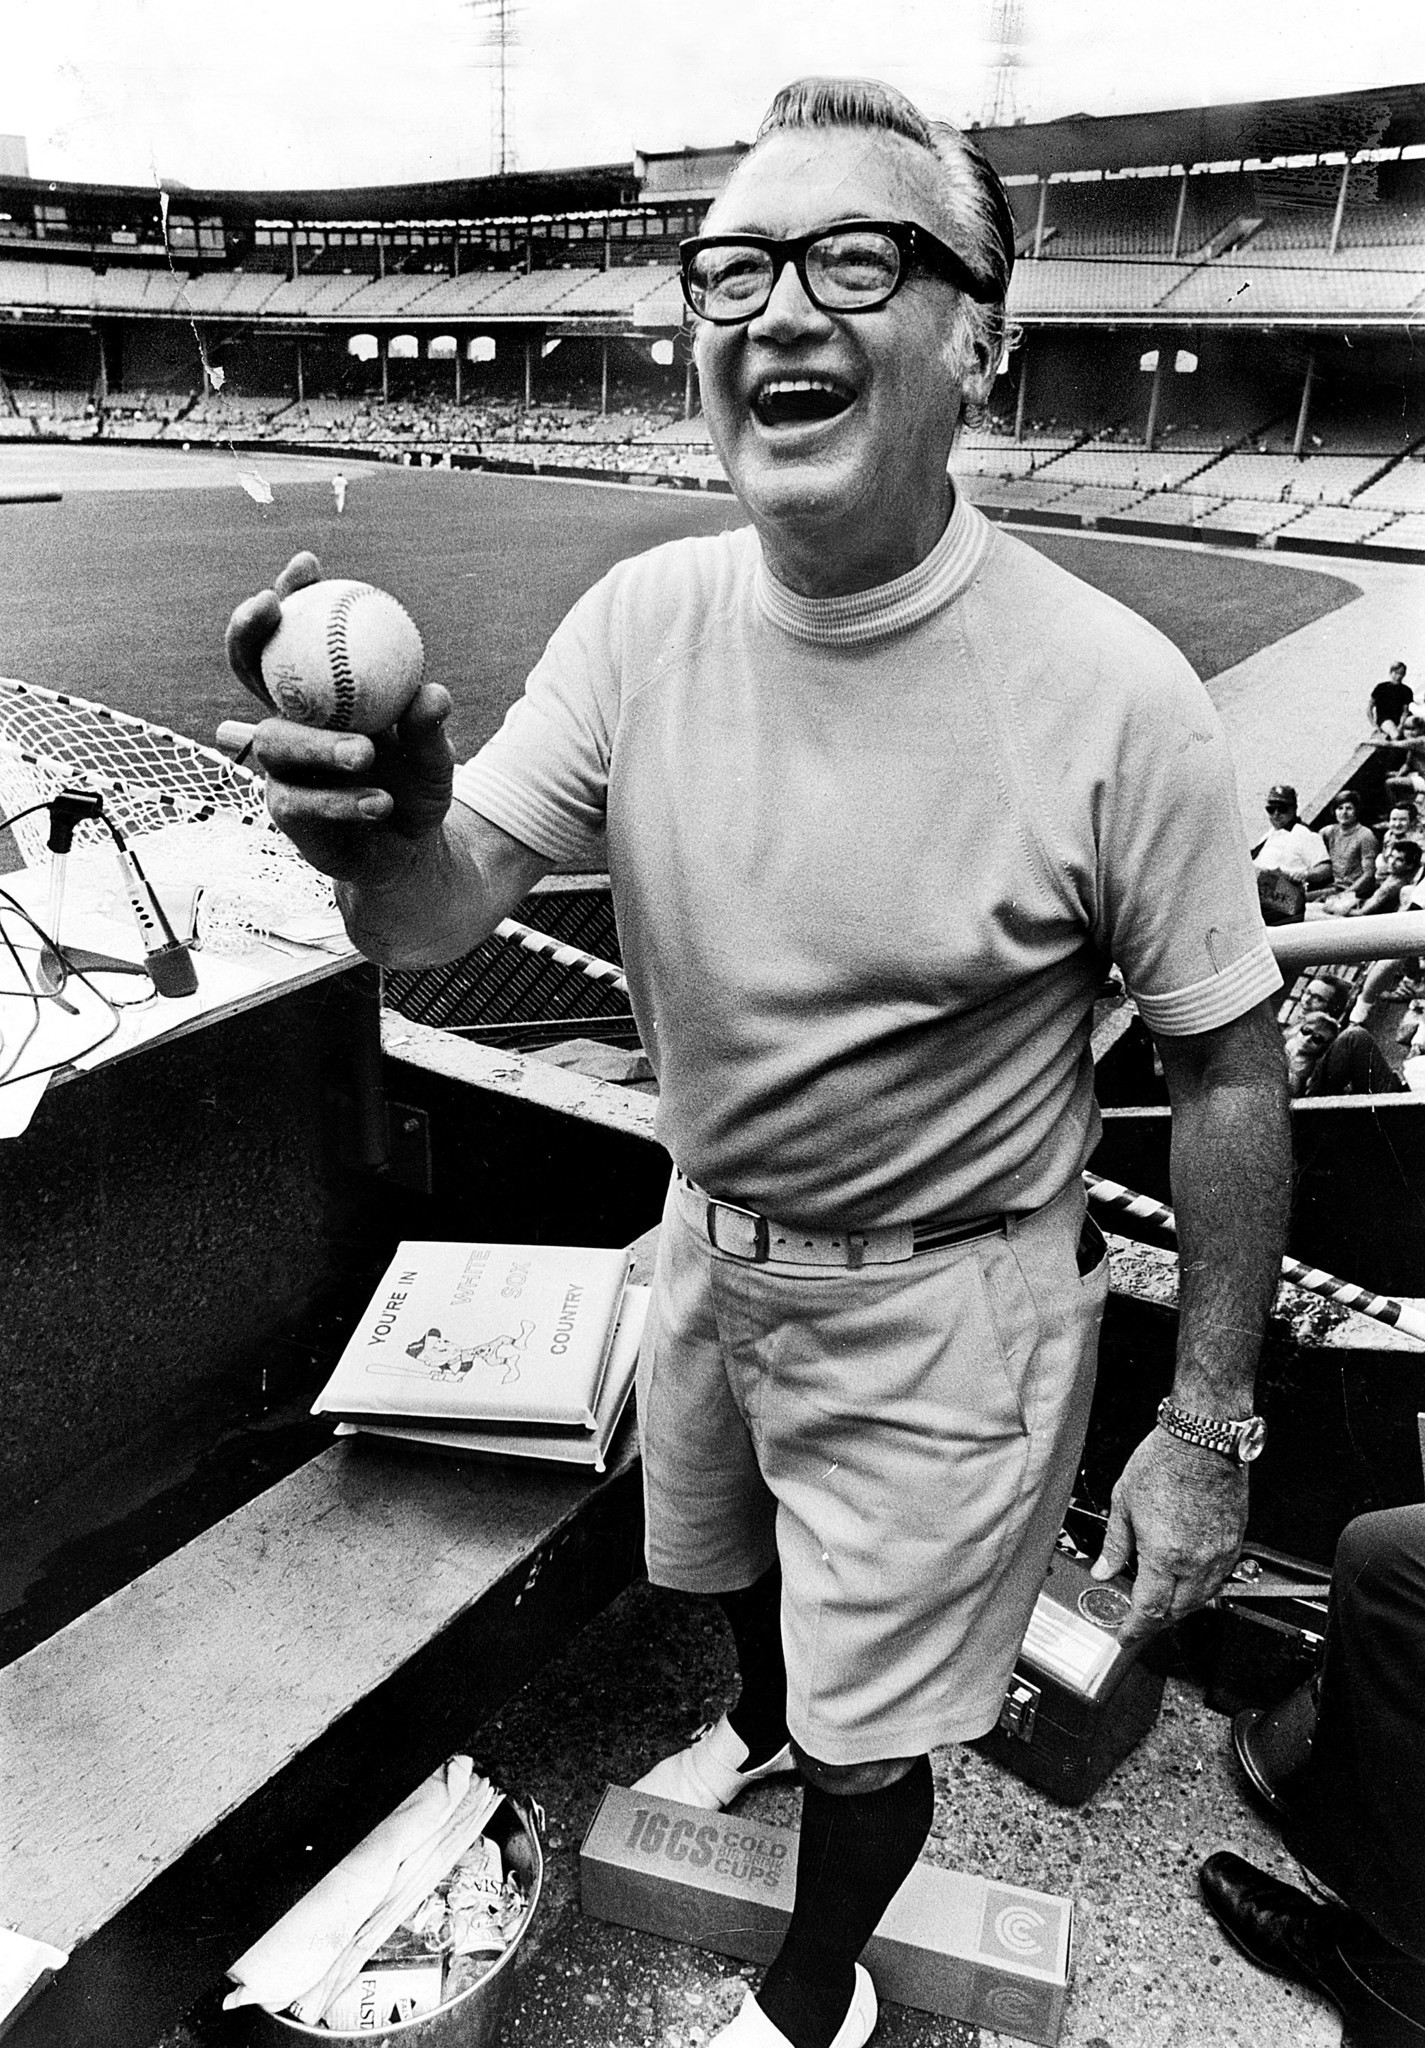 On This Date in 1998: Cubs broadcaster Harry Caray dies